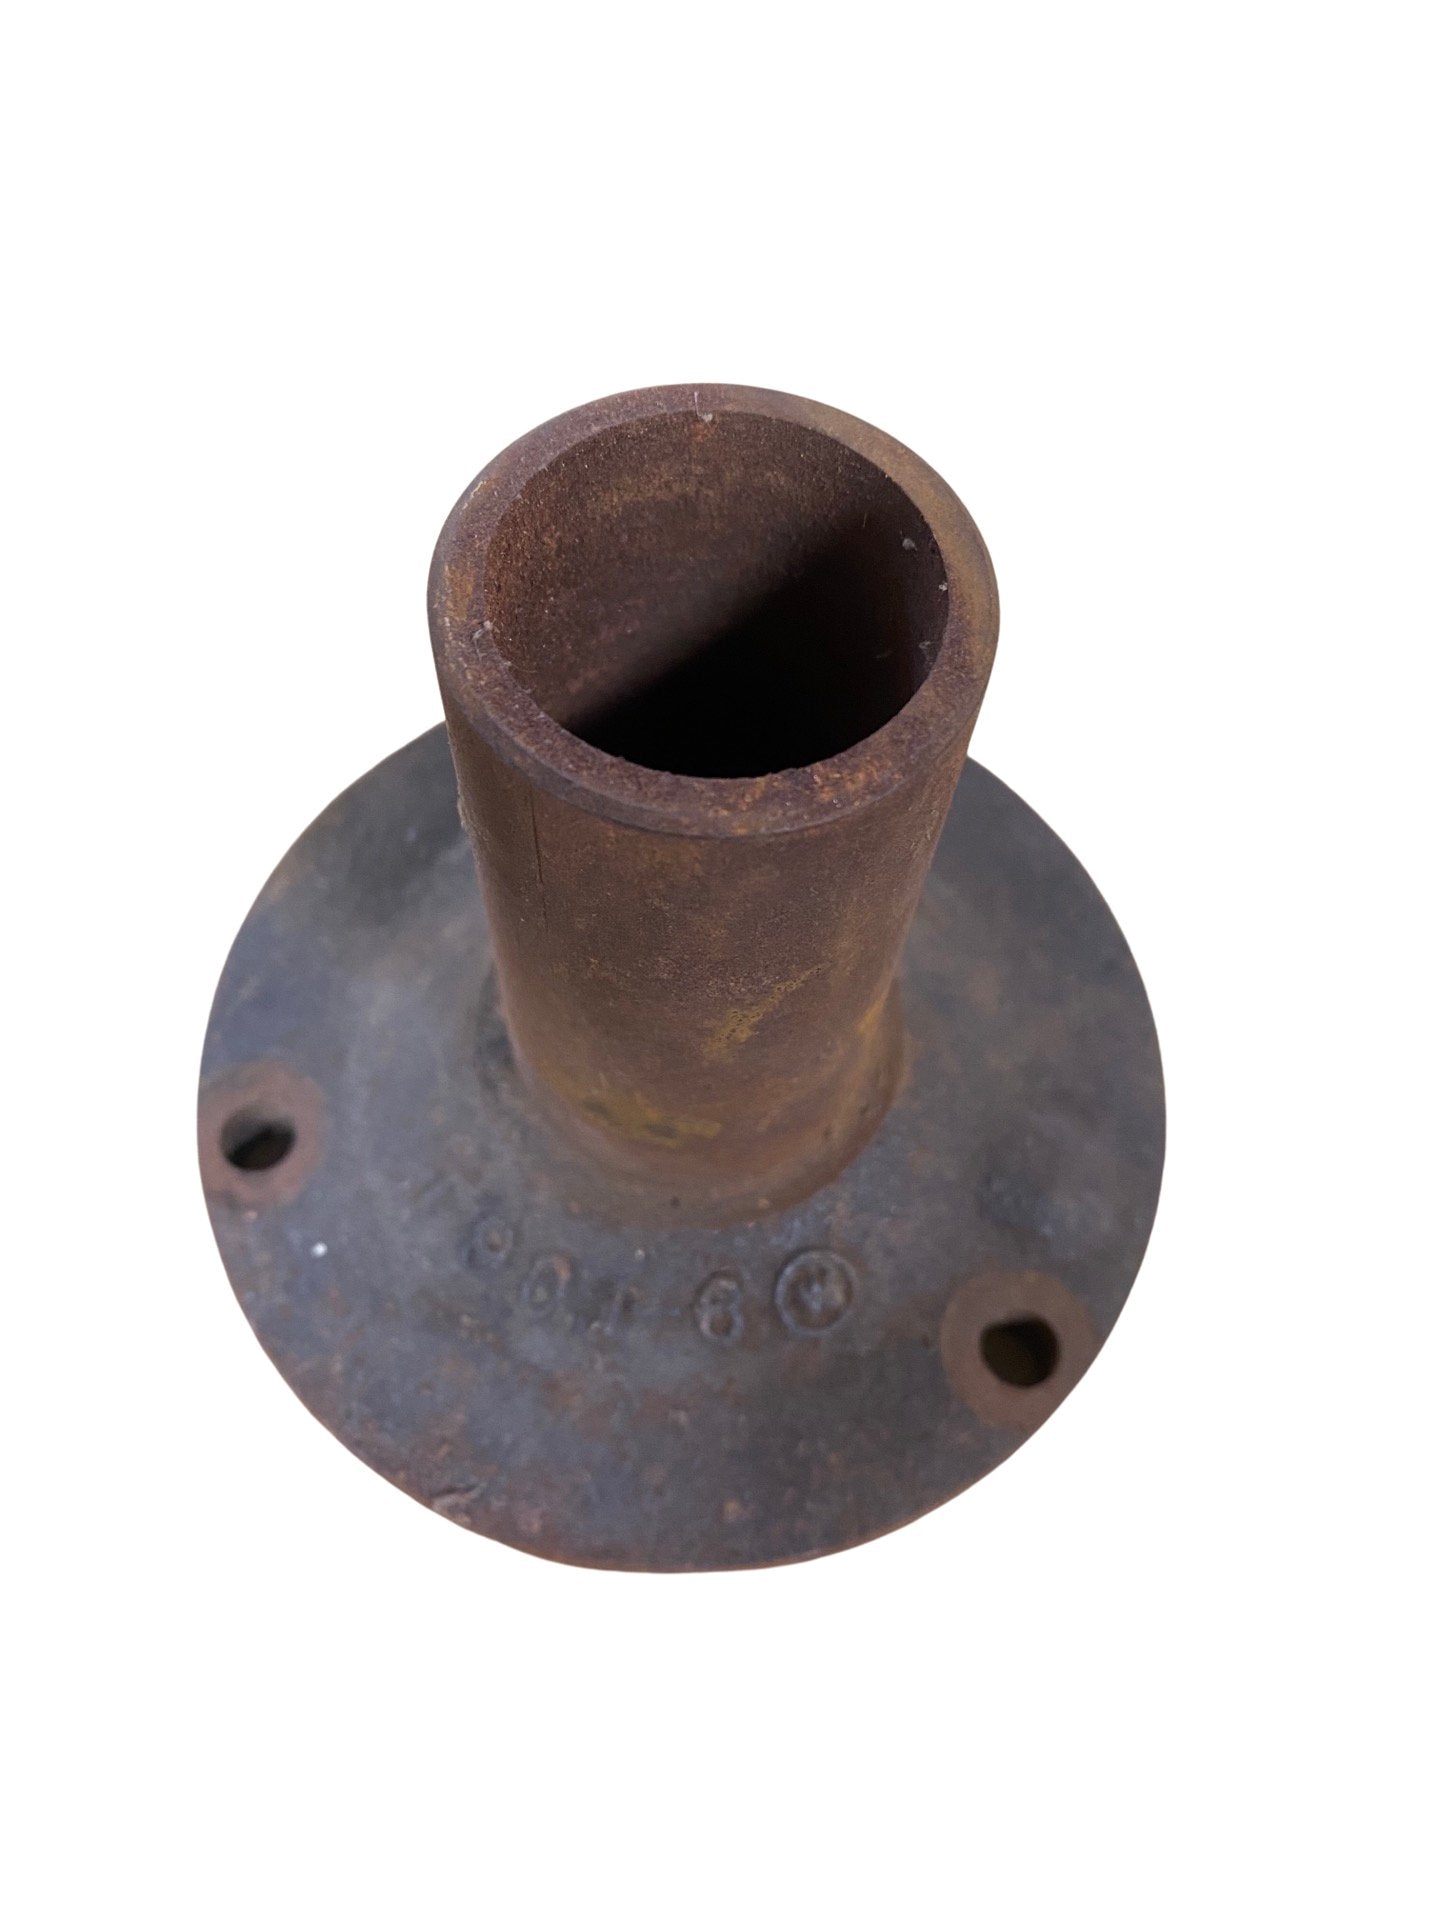 Front Bearing Retainer Cap, NOS, T-90, 1946-1964, Willys Station Wagon, Pickup, and Sedan Delivery - The JeepsterMan